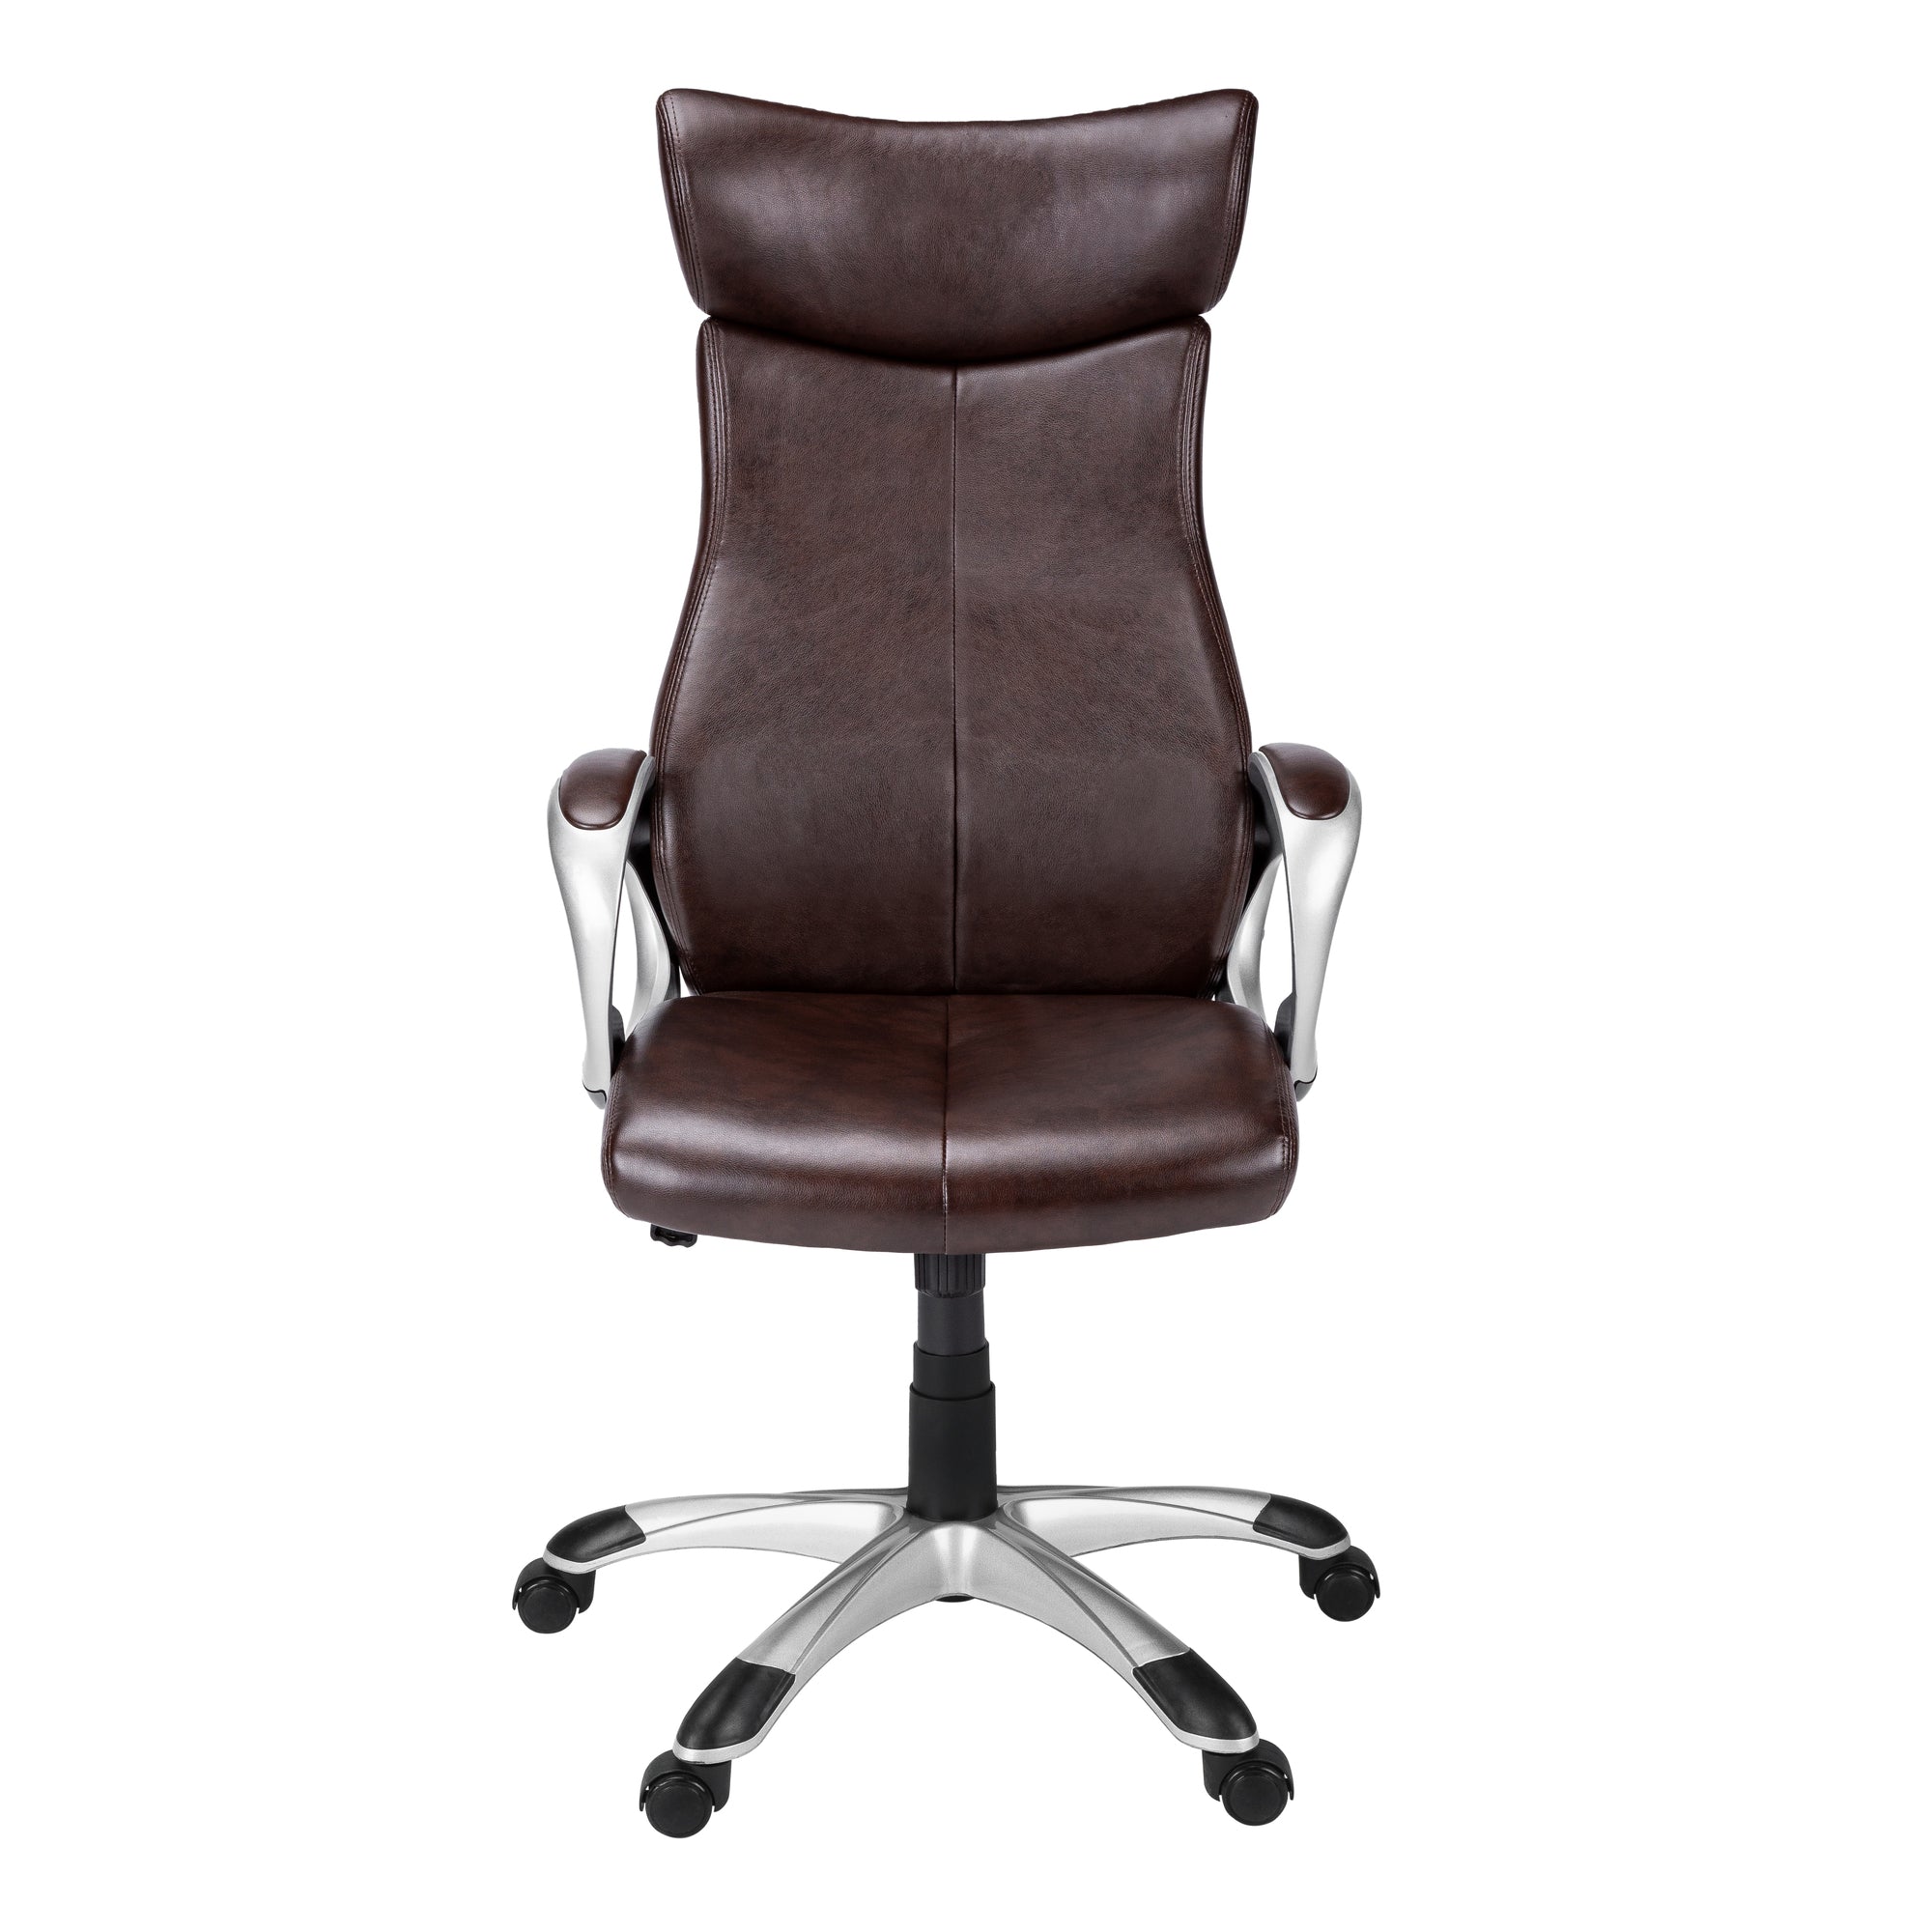 Brown-Faux-Leather-Seat-Swivel-Adjustable-Executive-Chair-Leather-Back-Steel-Frame-Office-Chairs